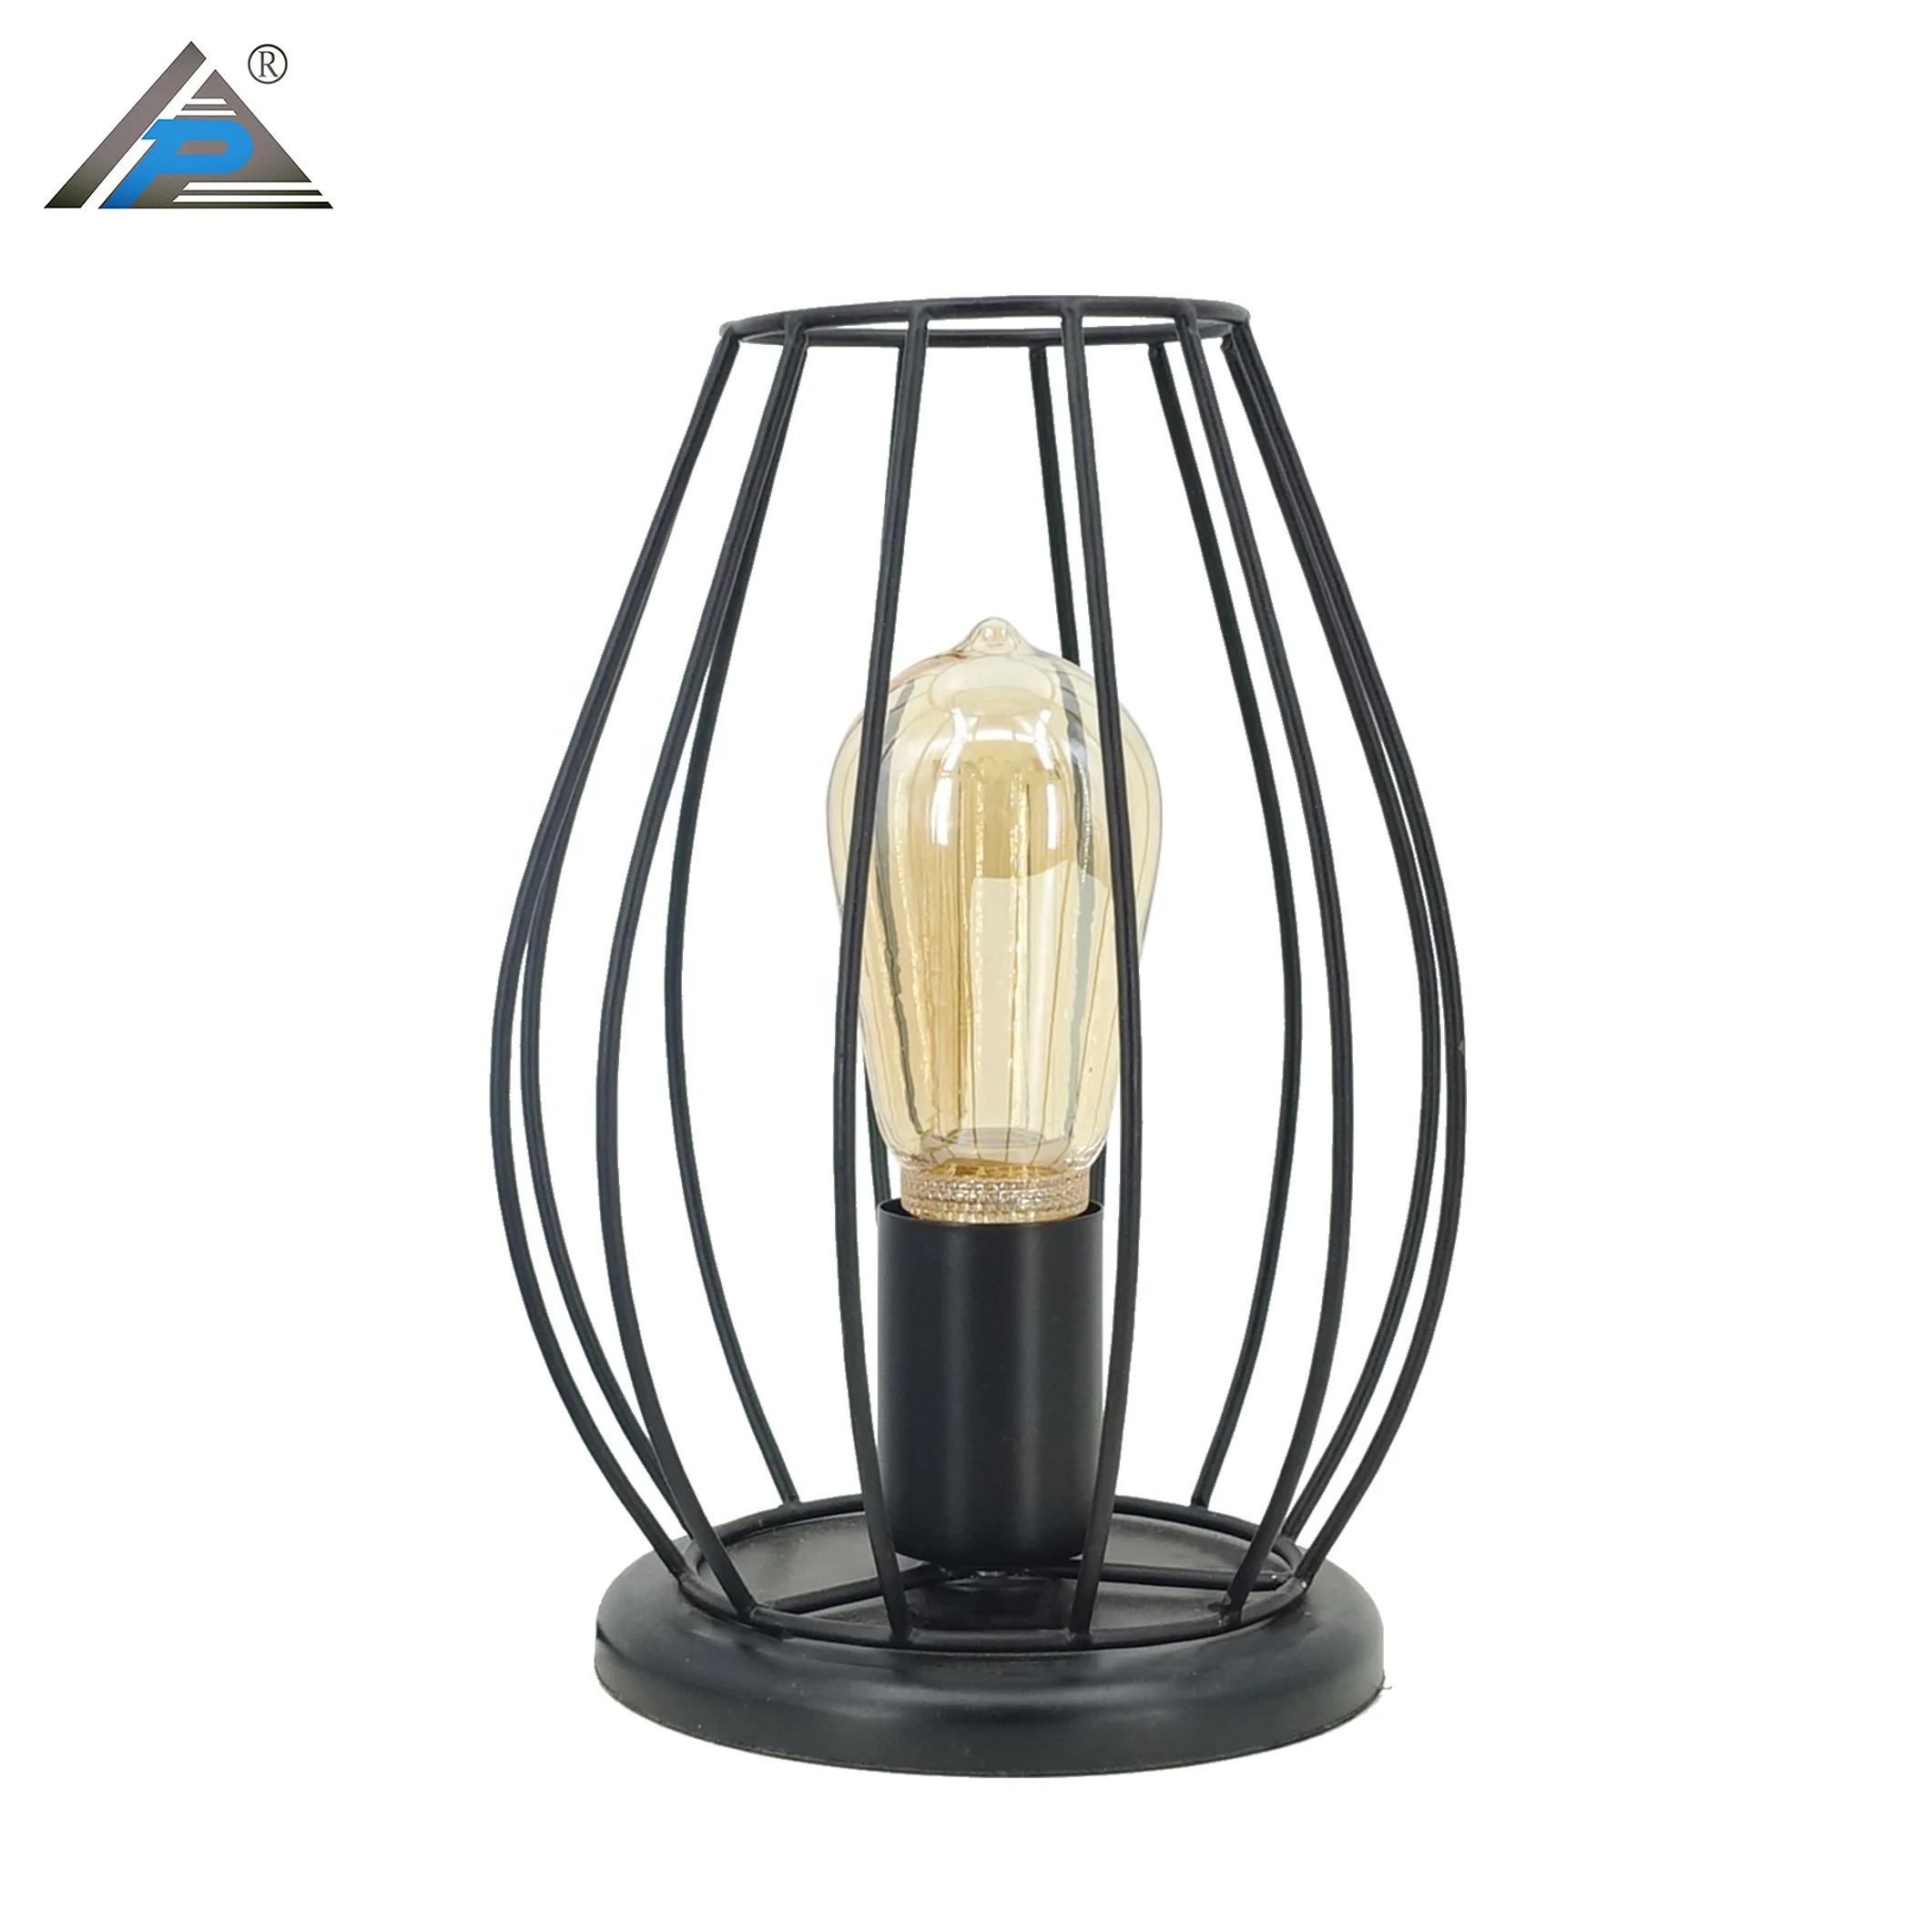 Modern Wood Base Iron Table Lamp with Cage Lampshade Desktop Night Light for Living Room Office Cafe Restaurant